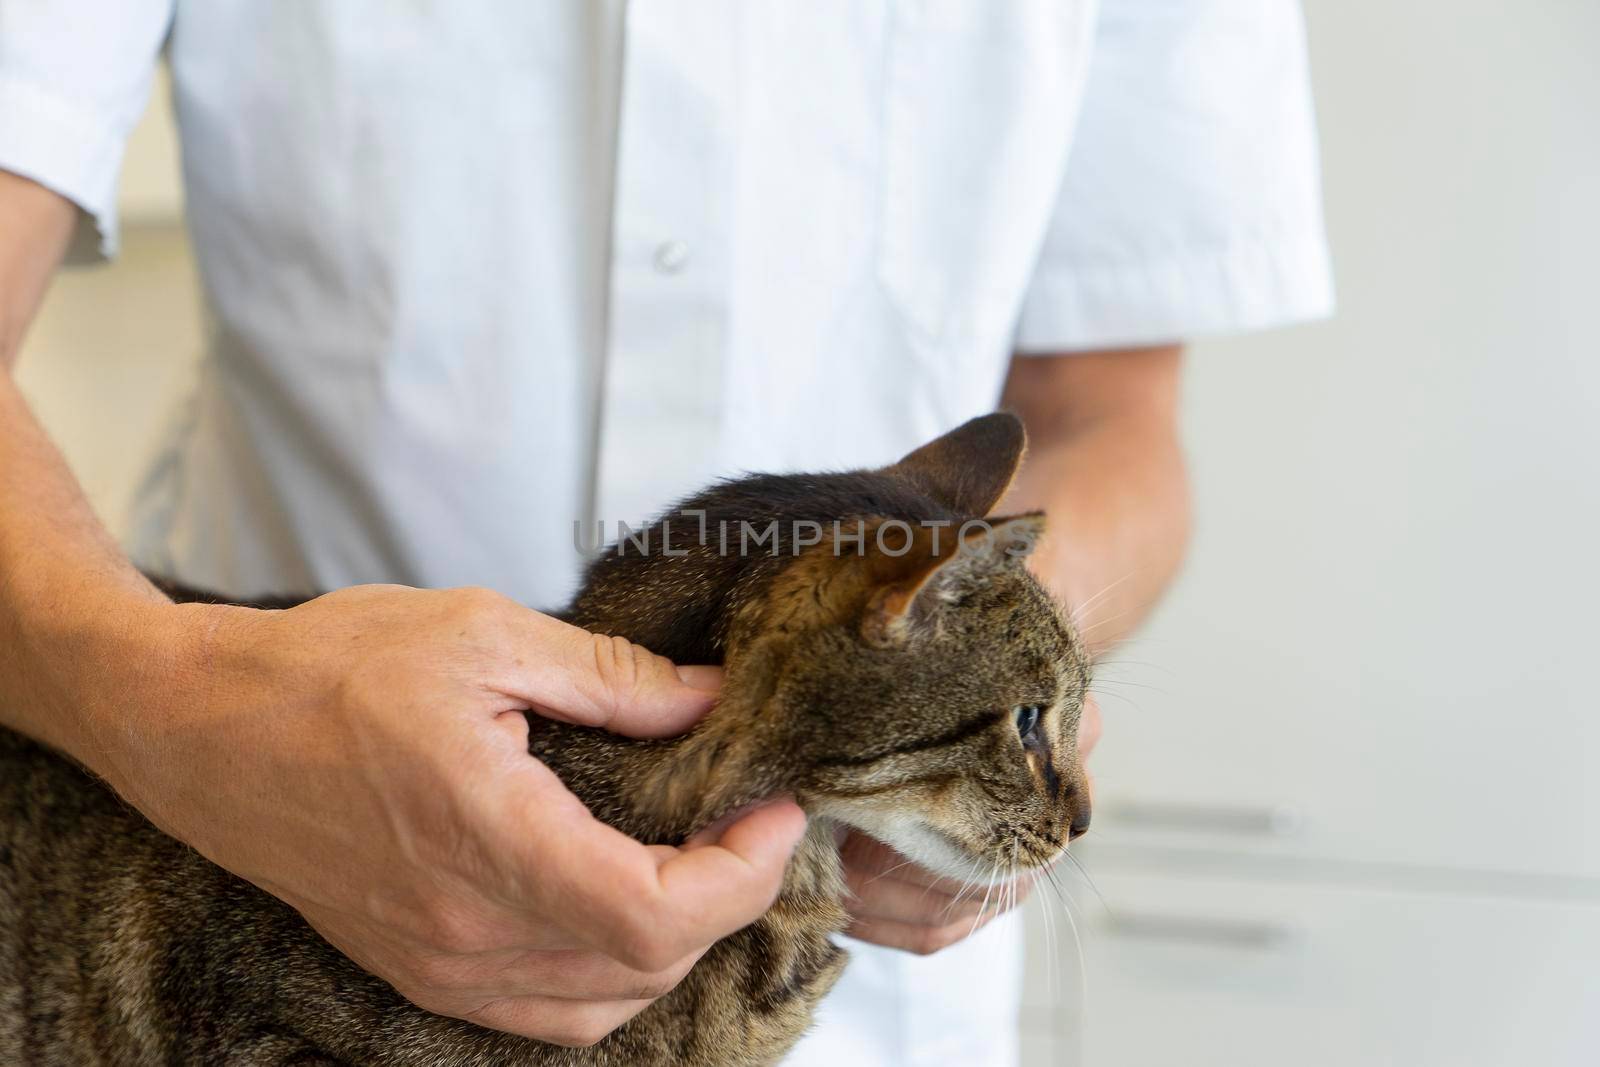 Tabby cat being examinated in his neck by an unrecognizable veterinarian squeezing his glands by LeoniekvanderVliet